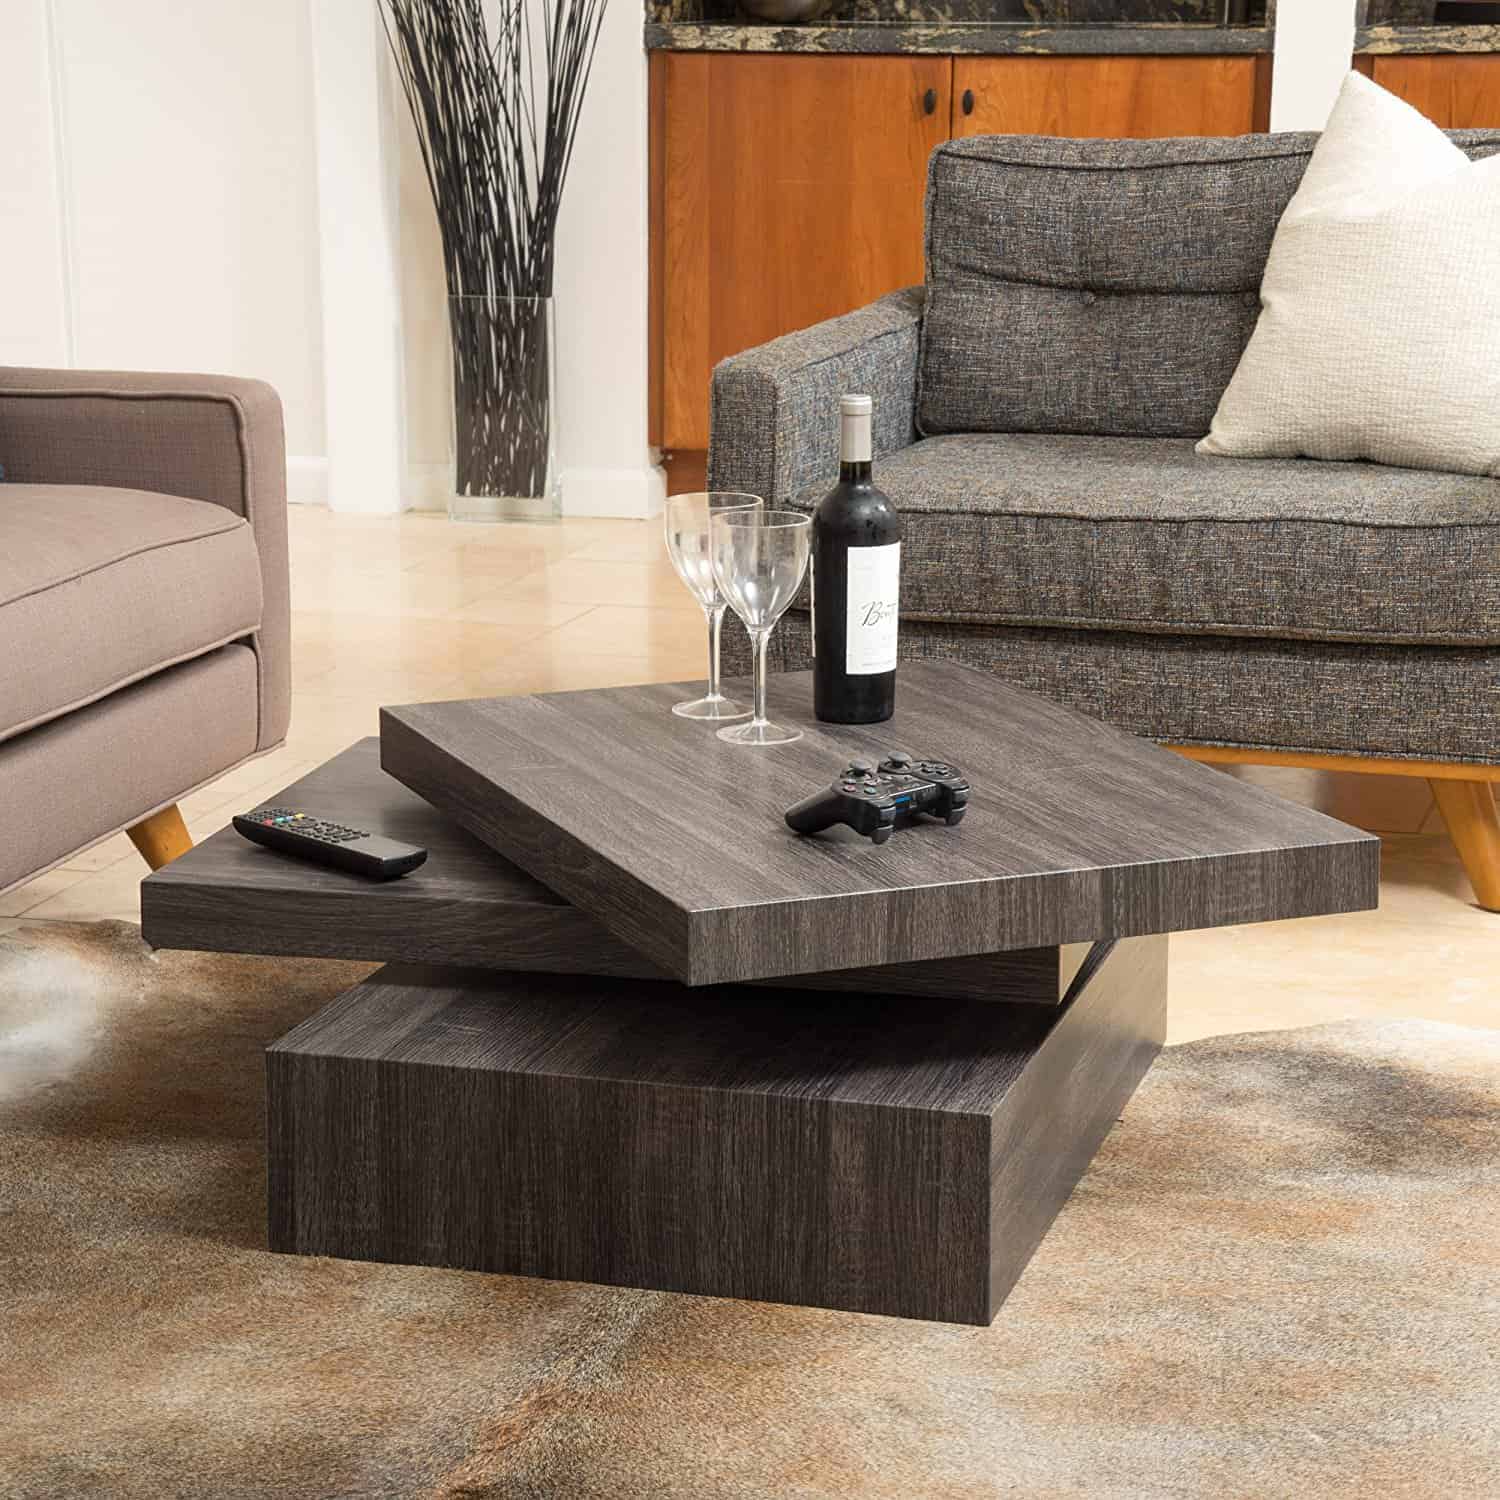 Unique Coffee Tables: Glass, Wood and Metal Coffee Tables Designs